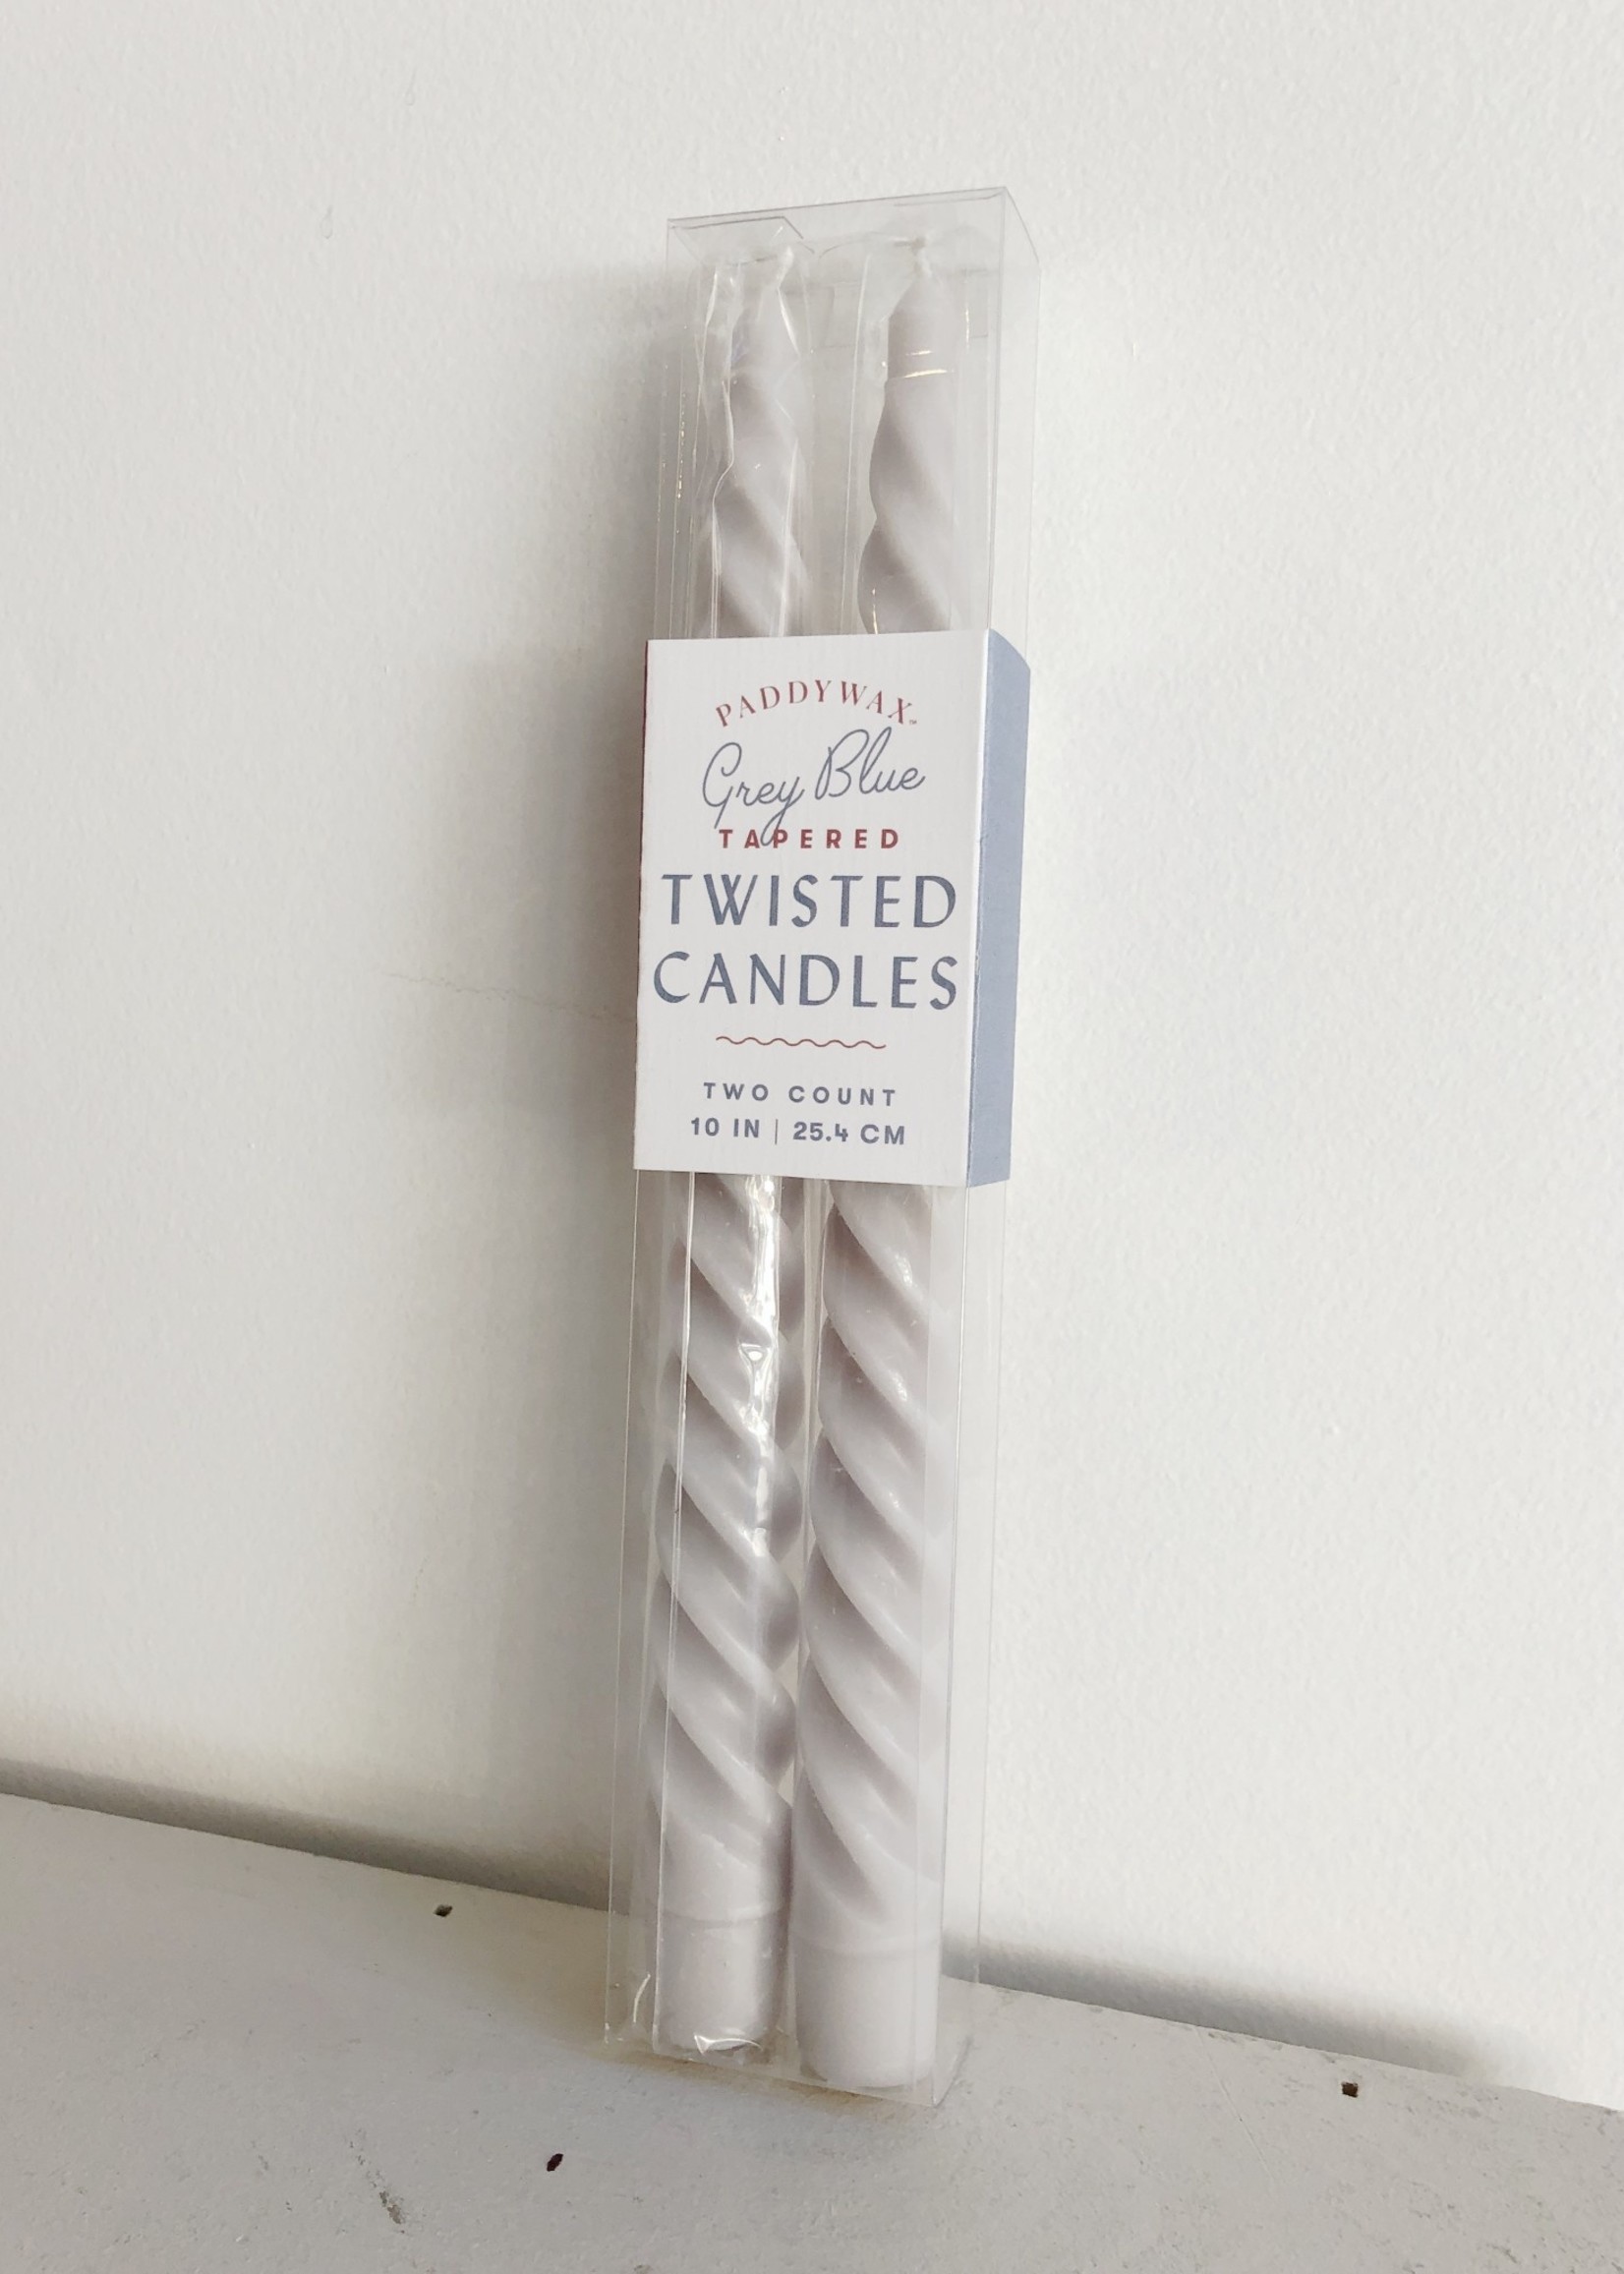 Paddywax Fall Twisted Candles Pair by Paddywax